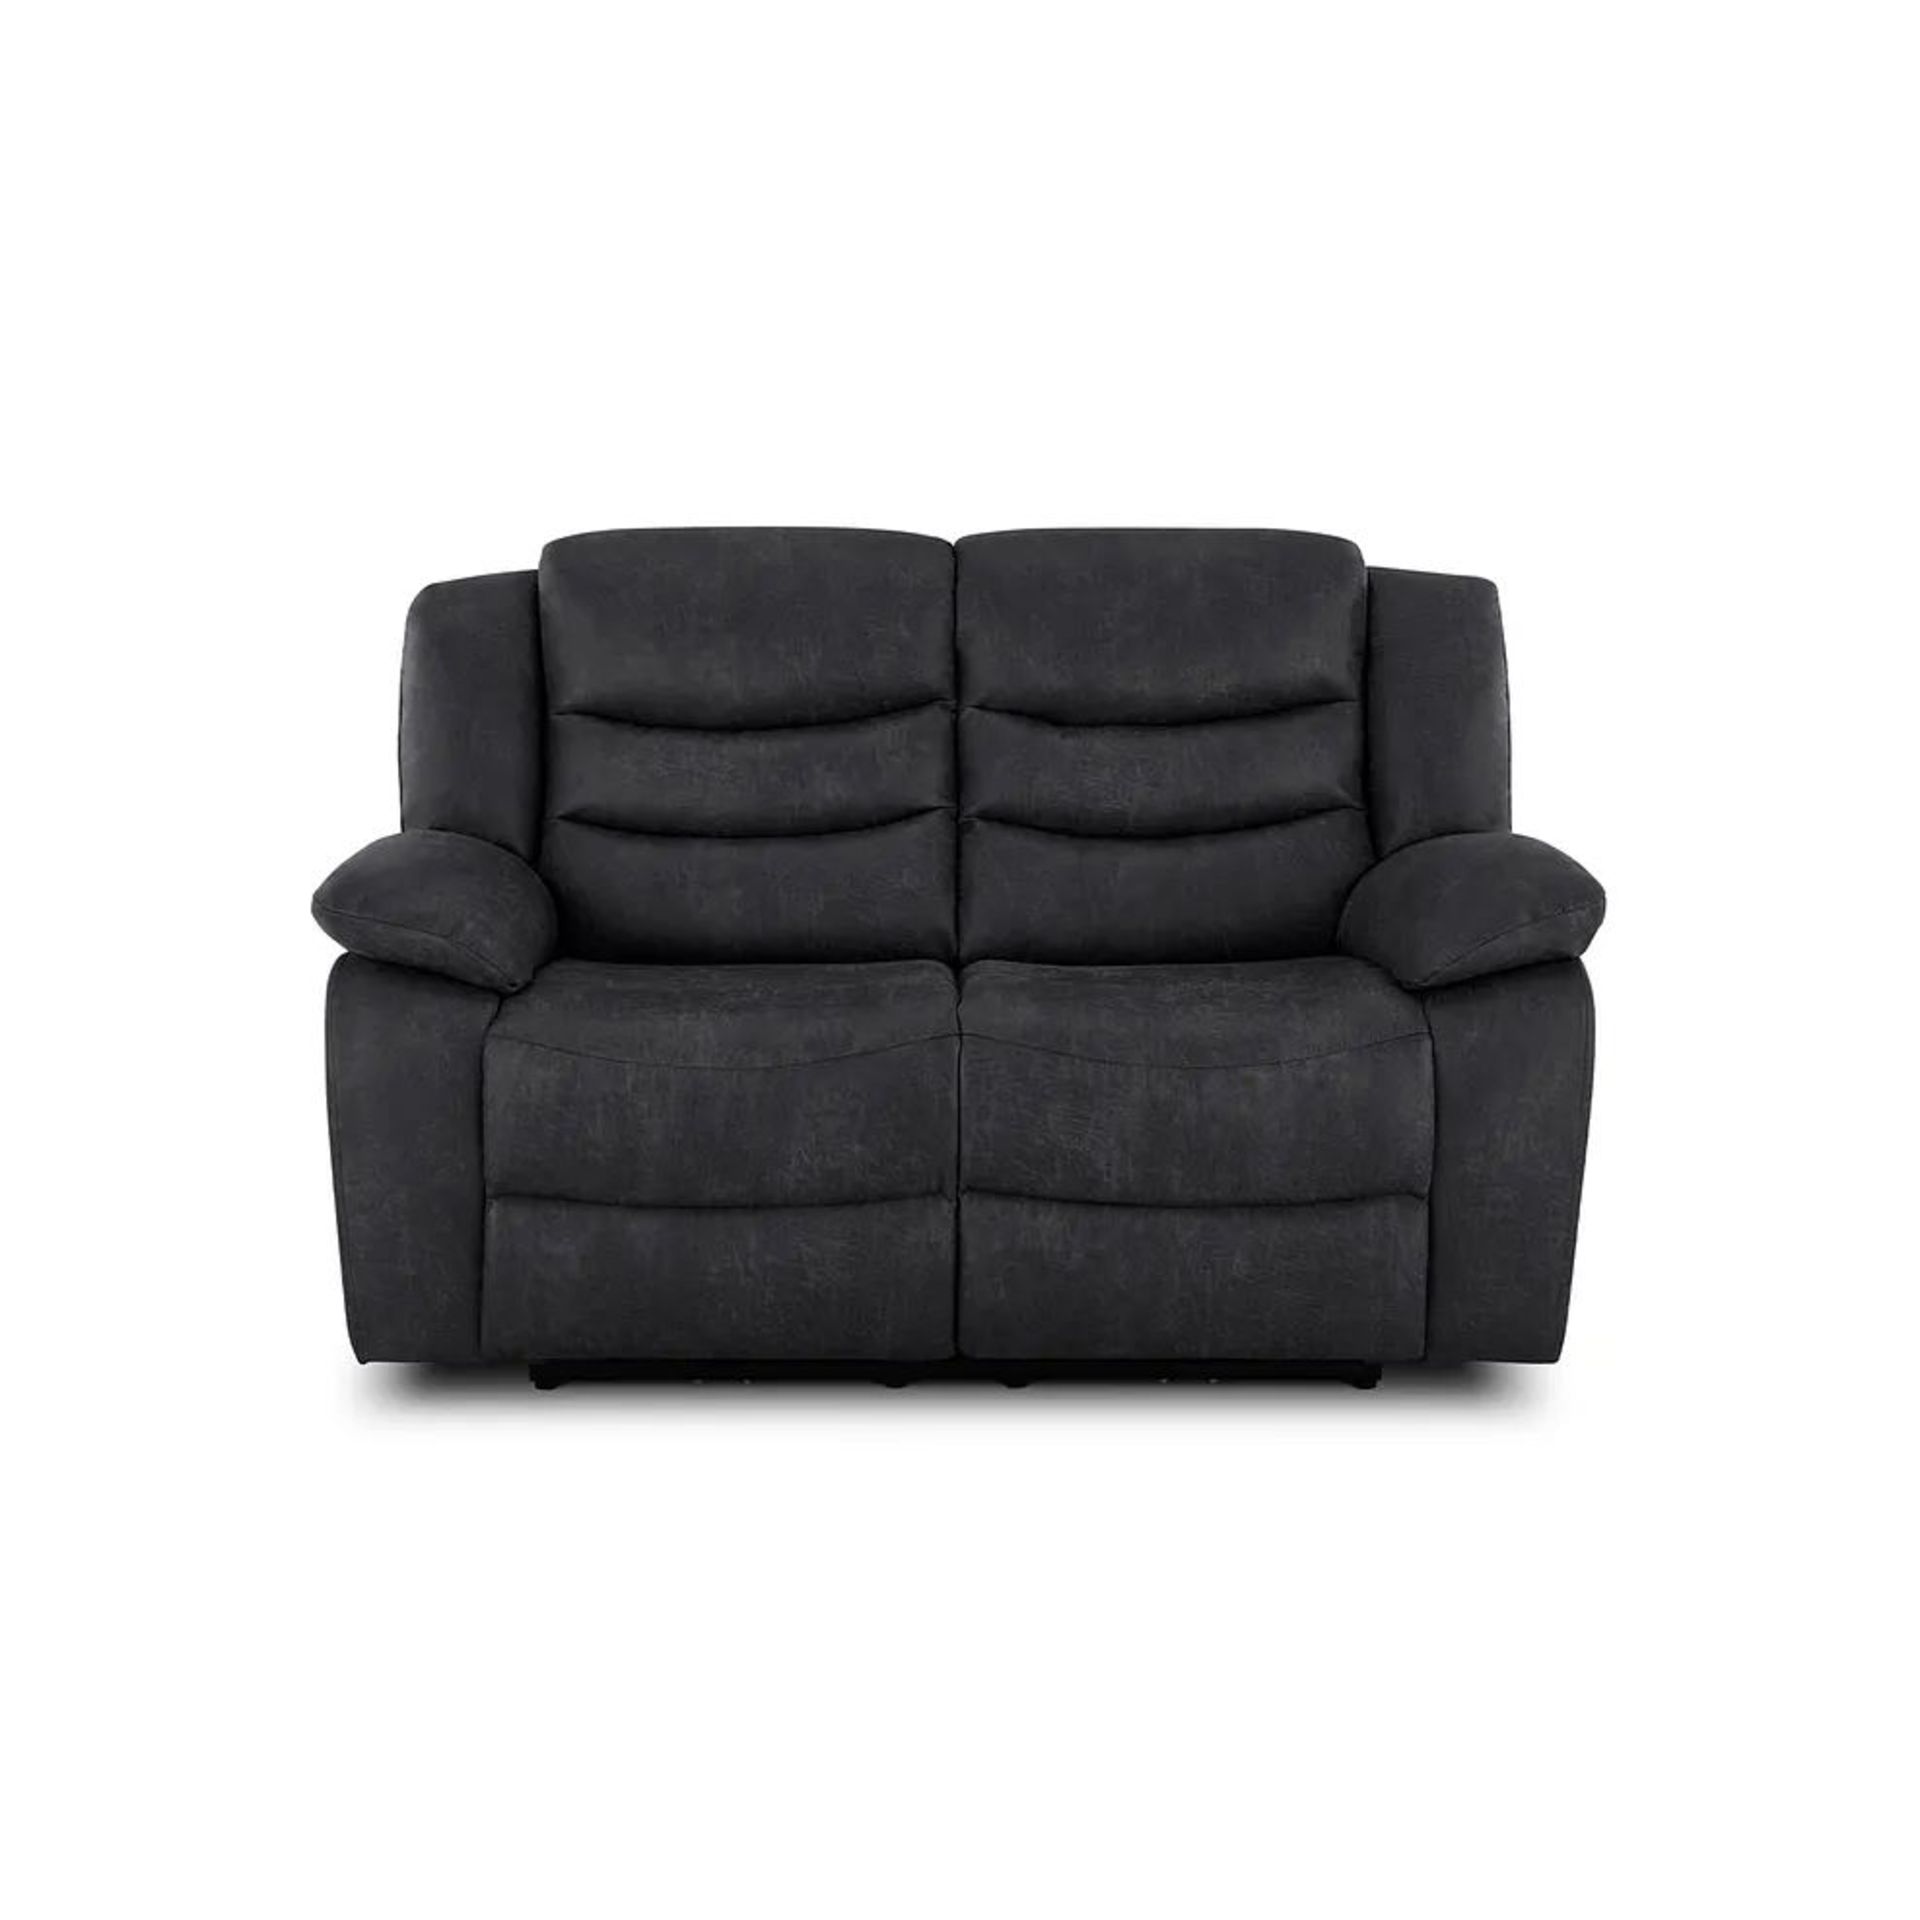 BRAND NEW MARLOW 2 Seater Electric Recliner Sofa - MILLER GREY FABRIC. RRP £1049. Designed to suit - Image 2 of 12